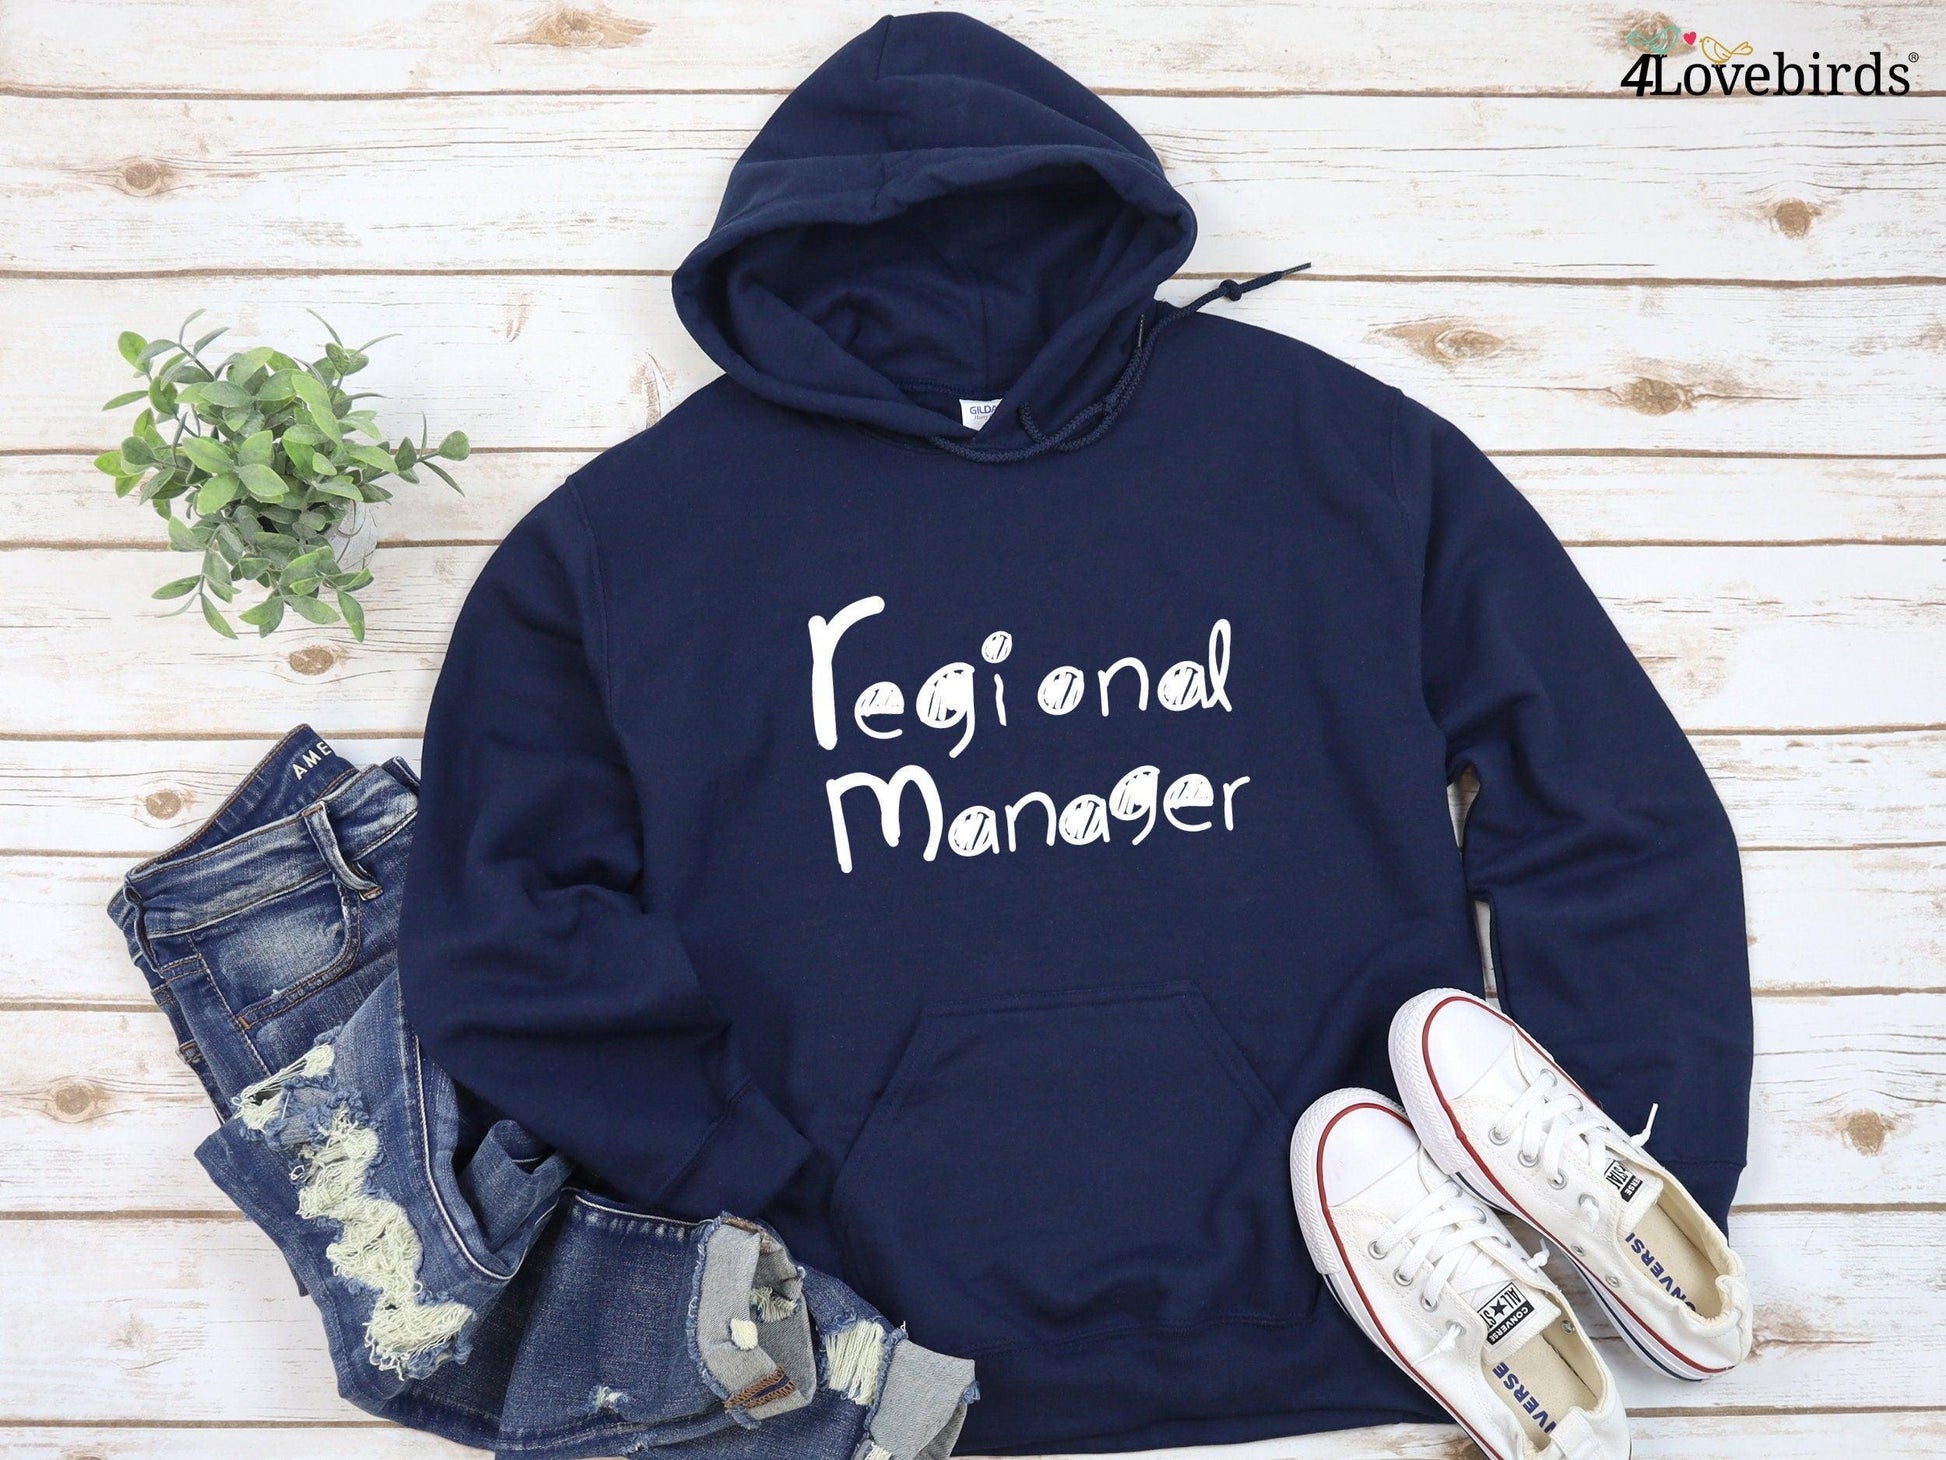 Regional Manager and Assistant To The Regional Manager Matching Family Hoodies - Matching Family Sweatshirts - Baby Gift - Daddy, Mommy & Me - 4Lovebirds